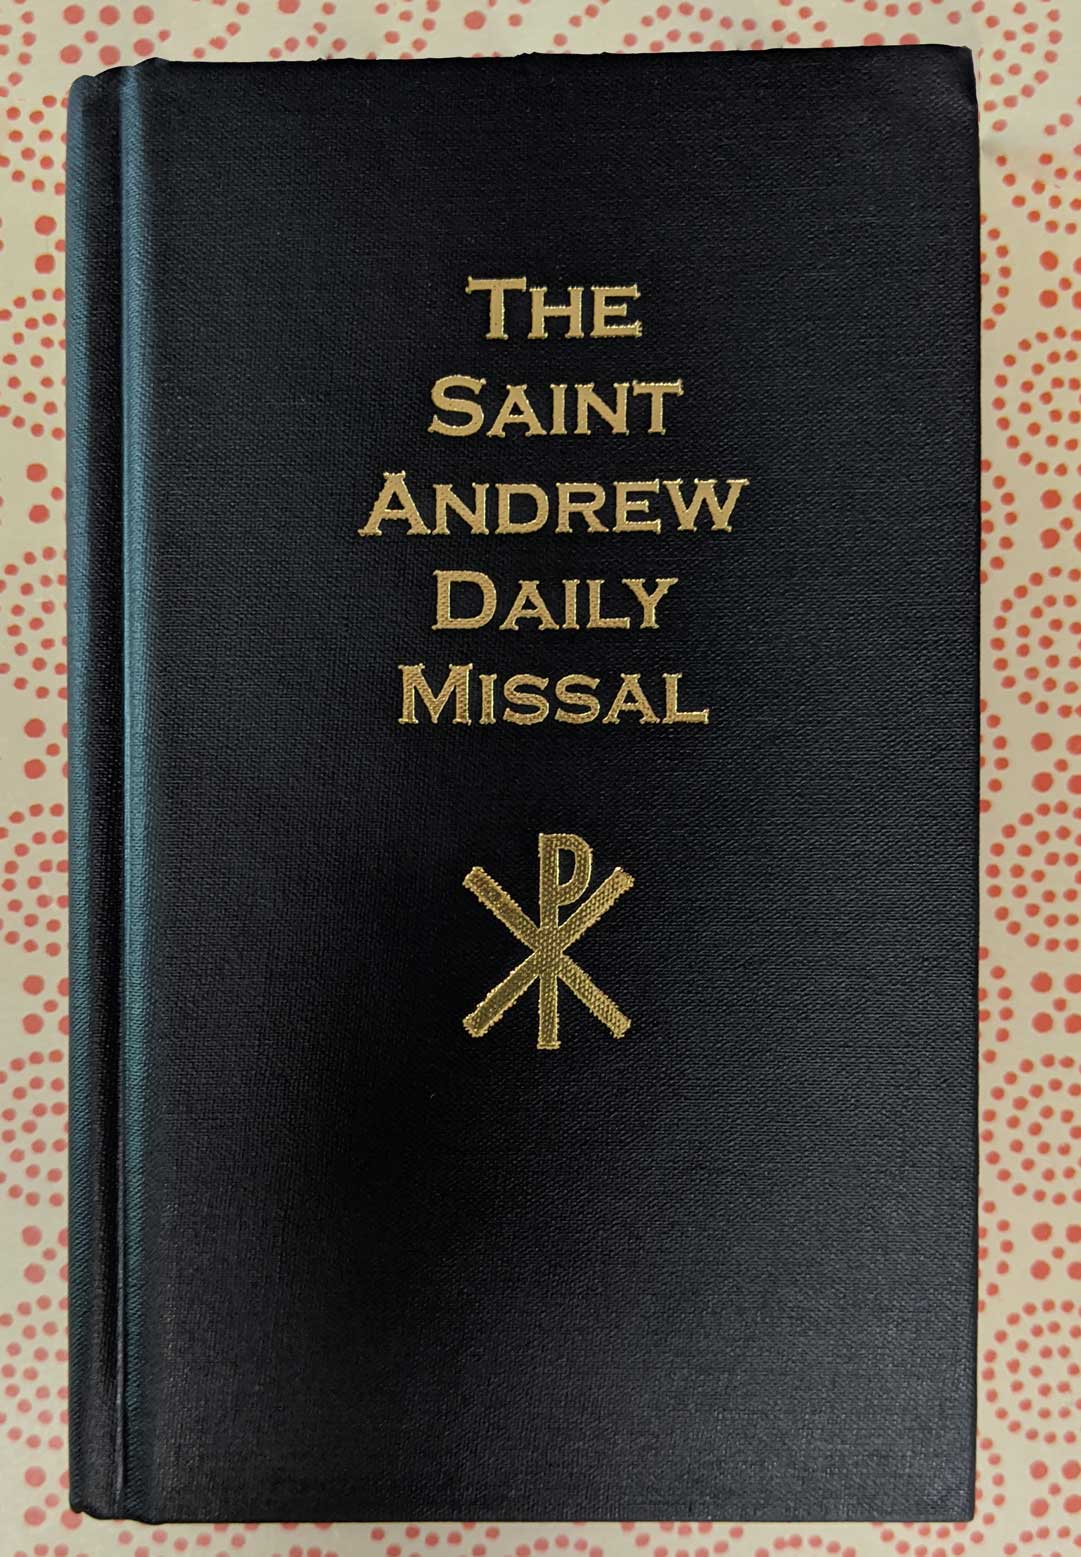 St. Andrew Daily Missal > Missals